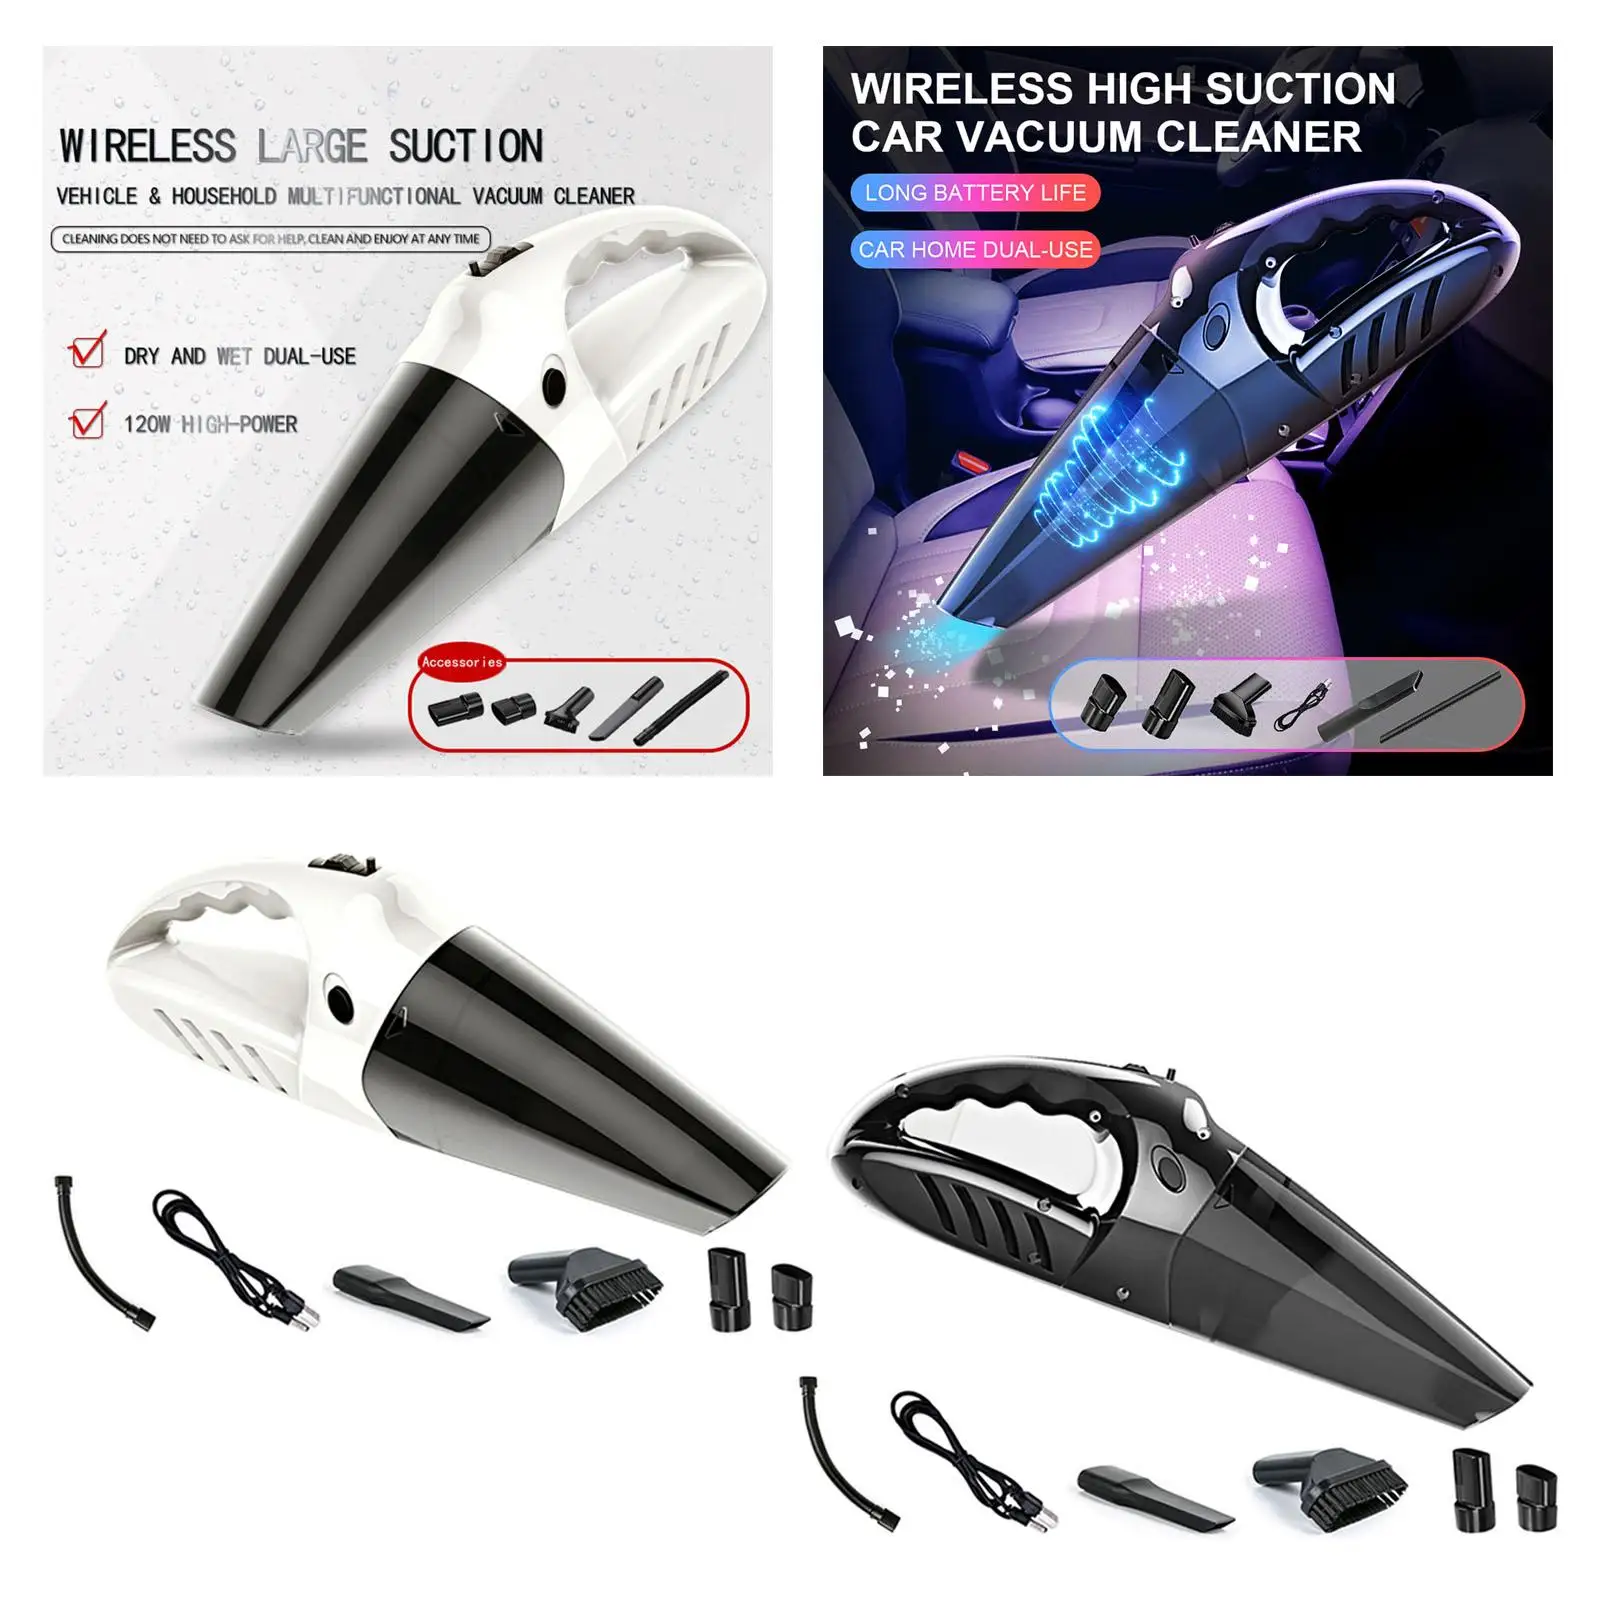 Car Vacuum Cleaner with 4 Attachments Key Operate Hand Held Vacuum for Home